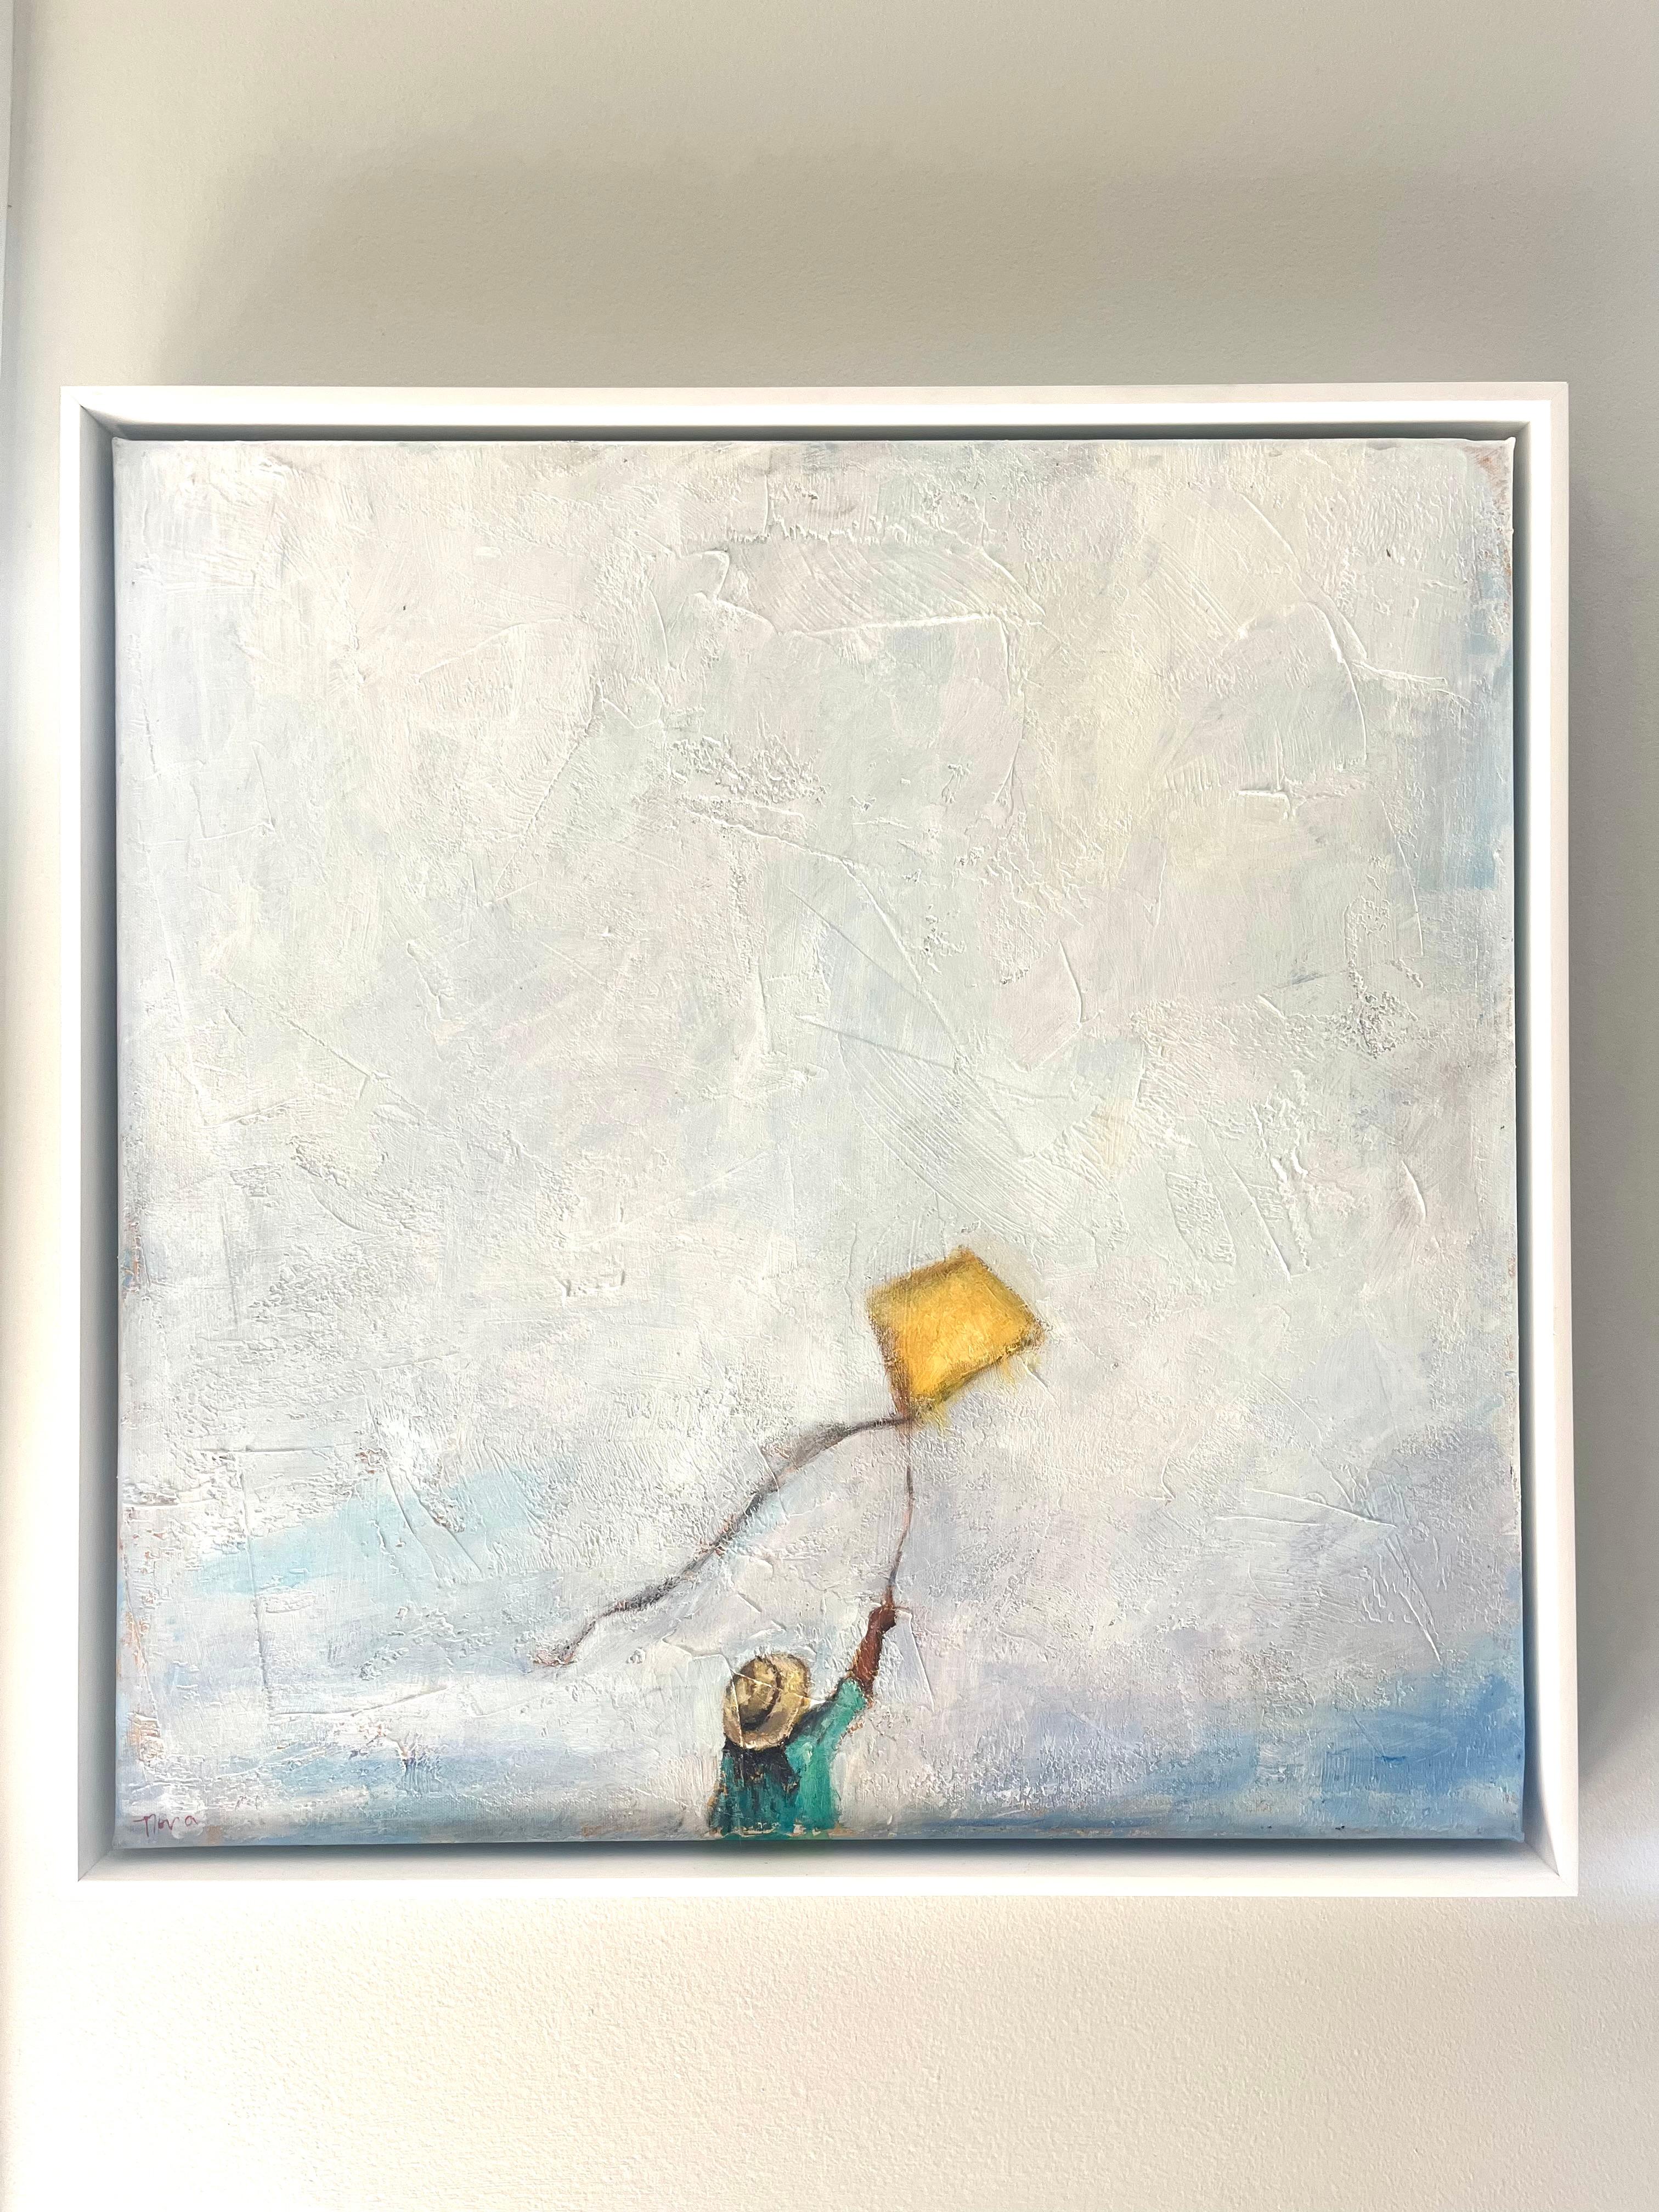 <p>Artist Comments<br>Artist Nava Lundy paints a young girl flying a bright yellow kite on a cloudy day. The impasto texture of the ethereal sky builds atmospheric depth. Nava aptly captures the feeling of a lighthearted and carefree moment. 